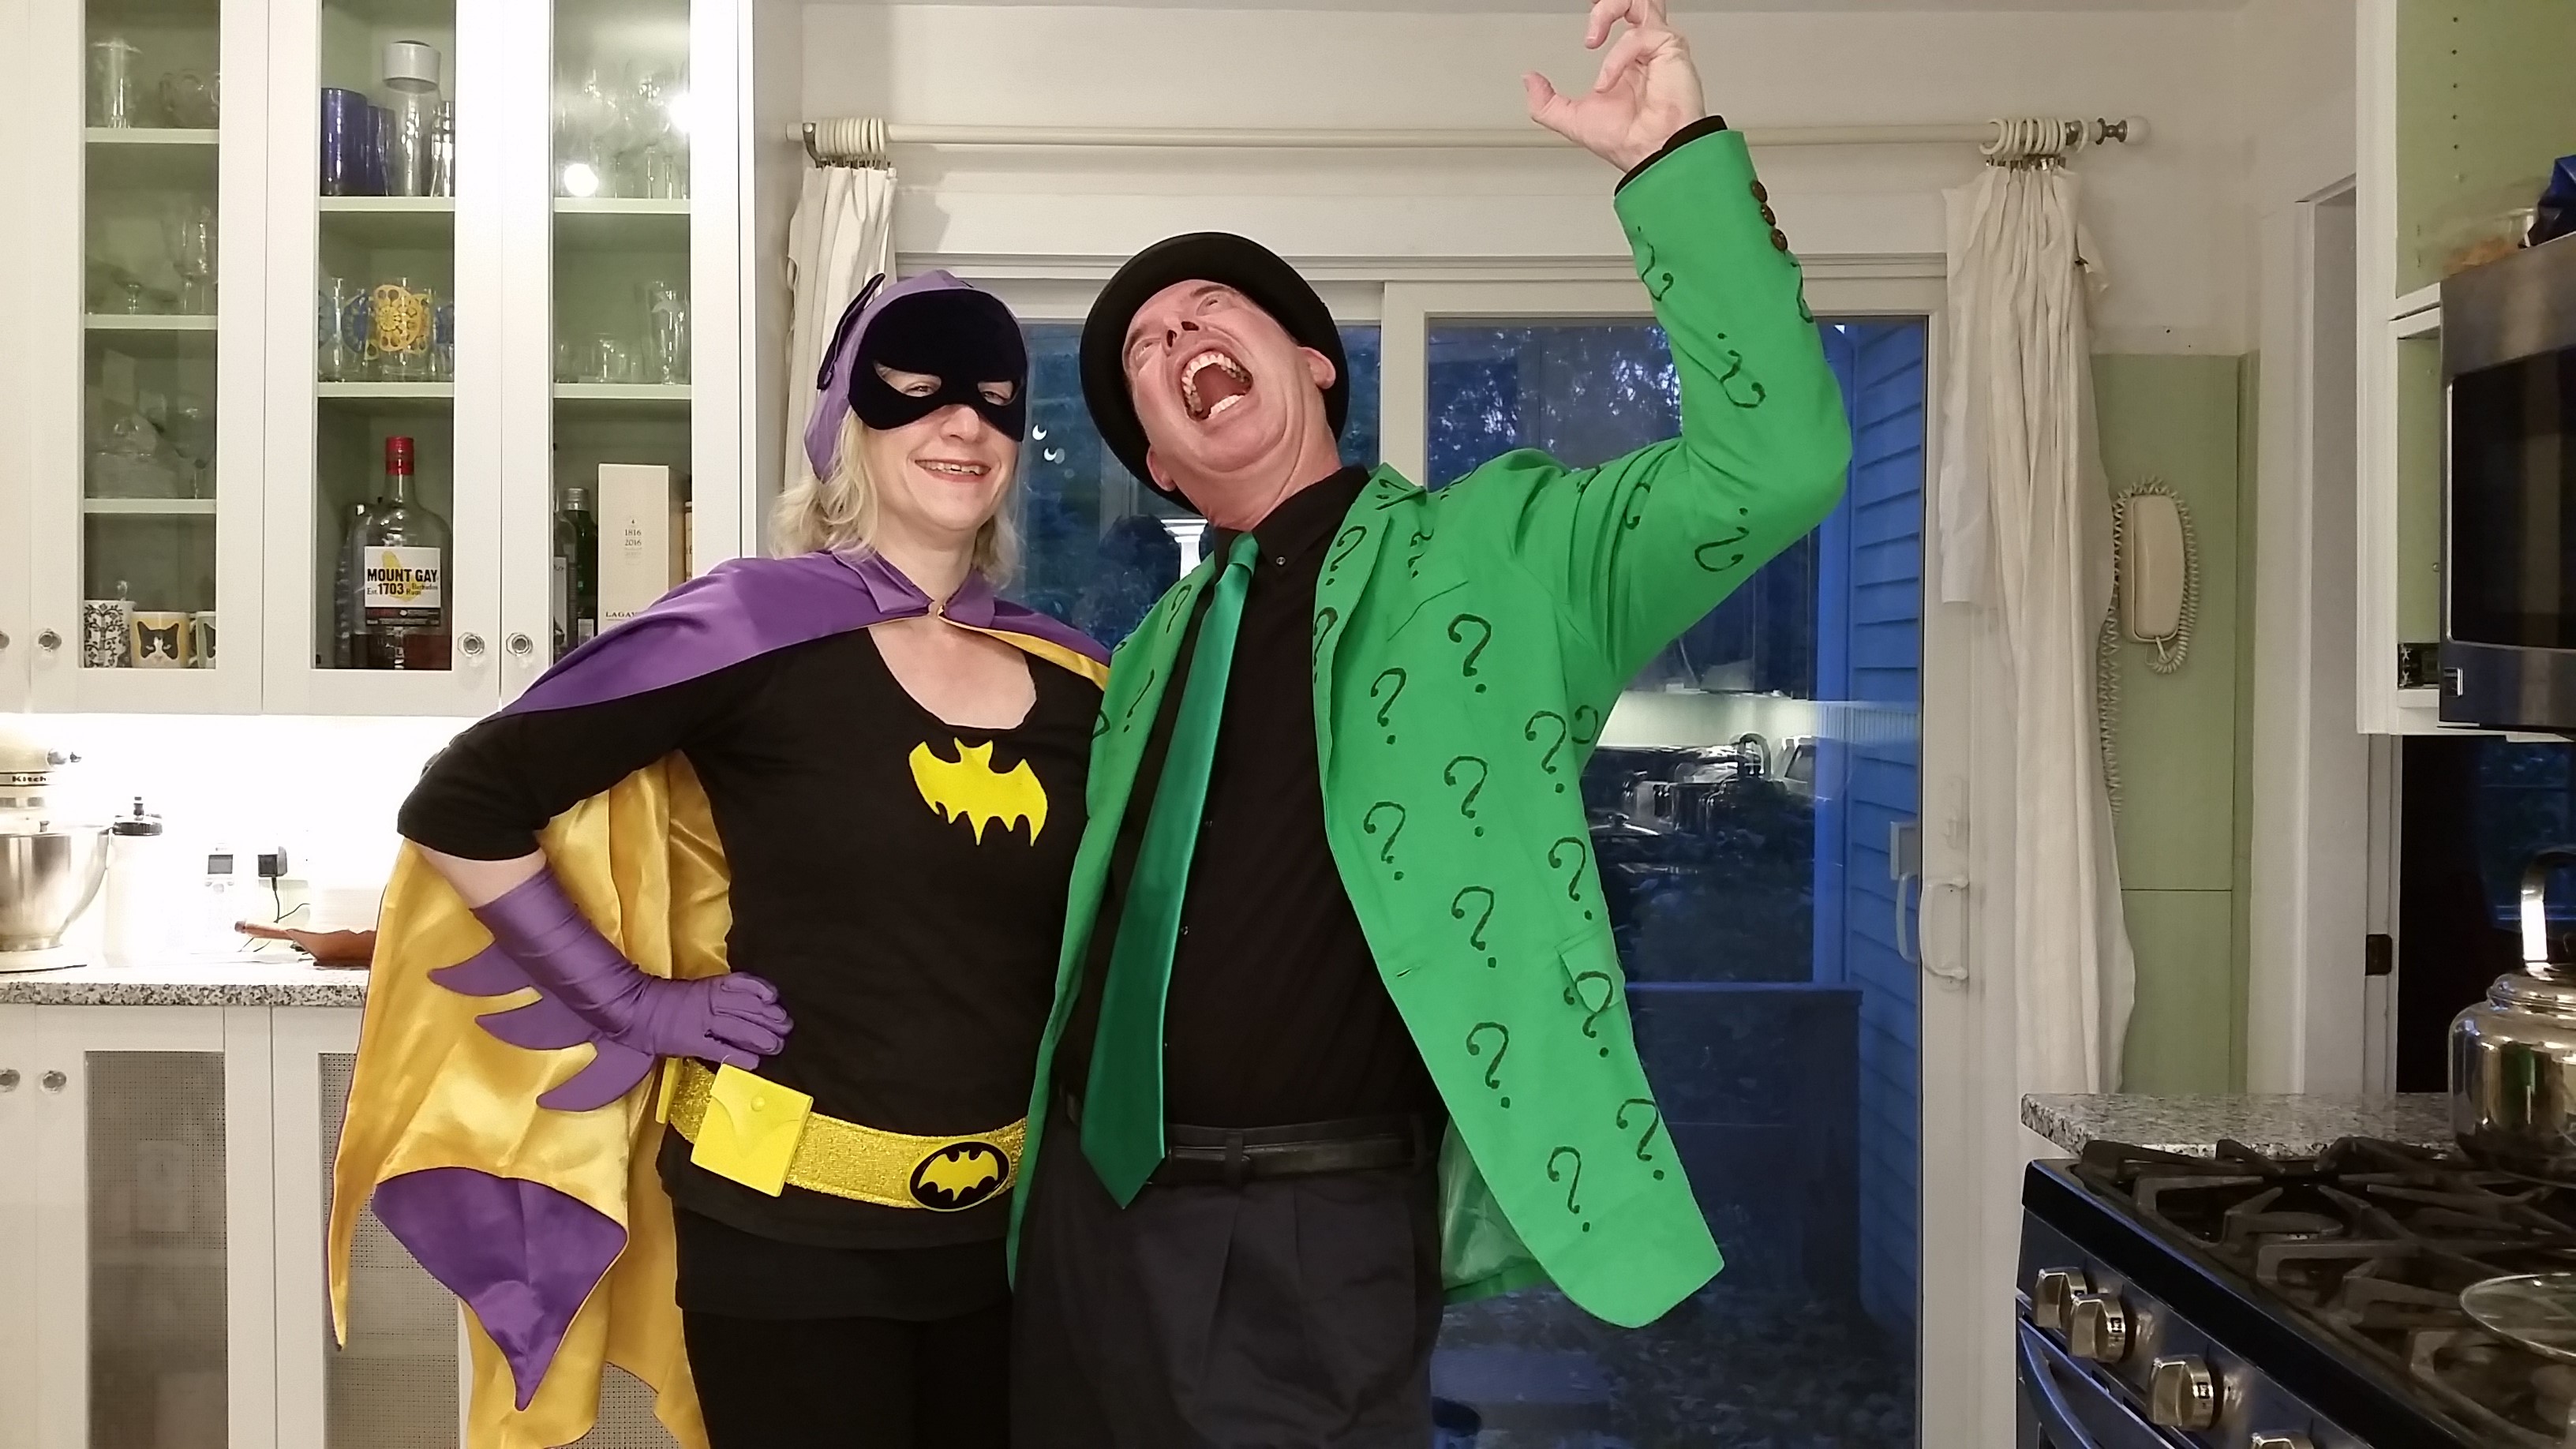 Abby Kingsbury dressed as Batgirl and her husband dressed as The Riddler